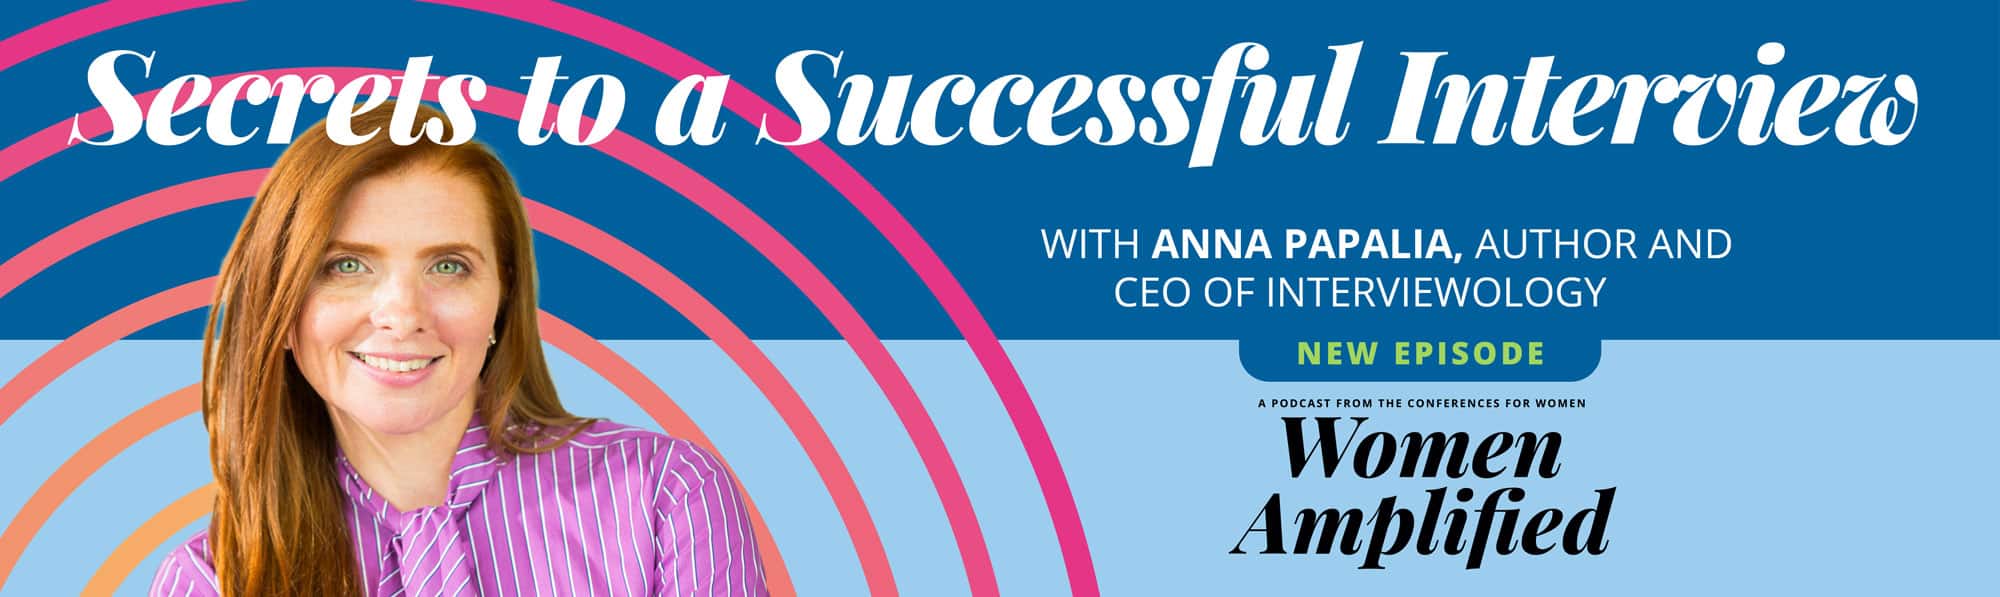 Secrets to a Successful Interview with Anna Papalia | Women Amplified Podcast